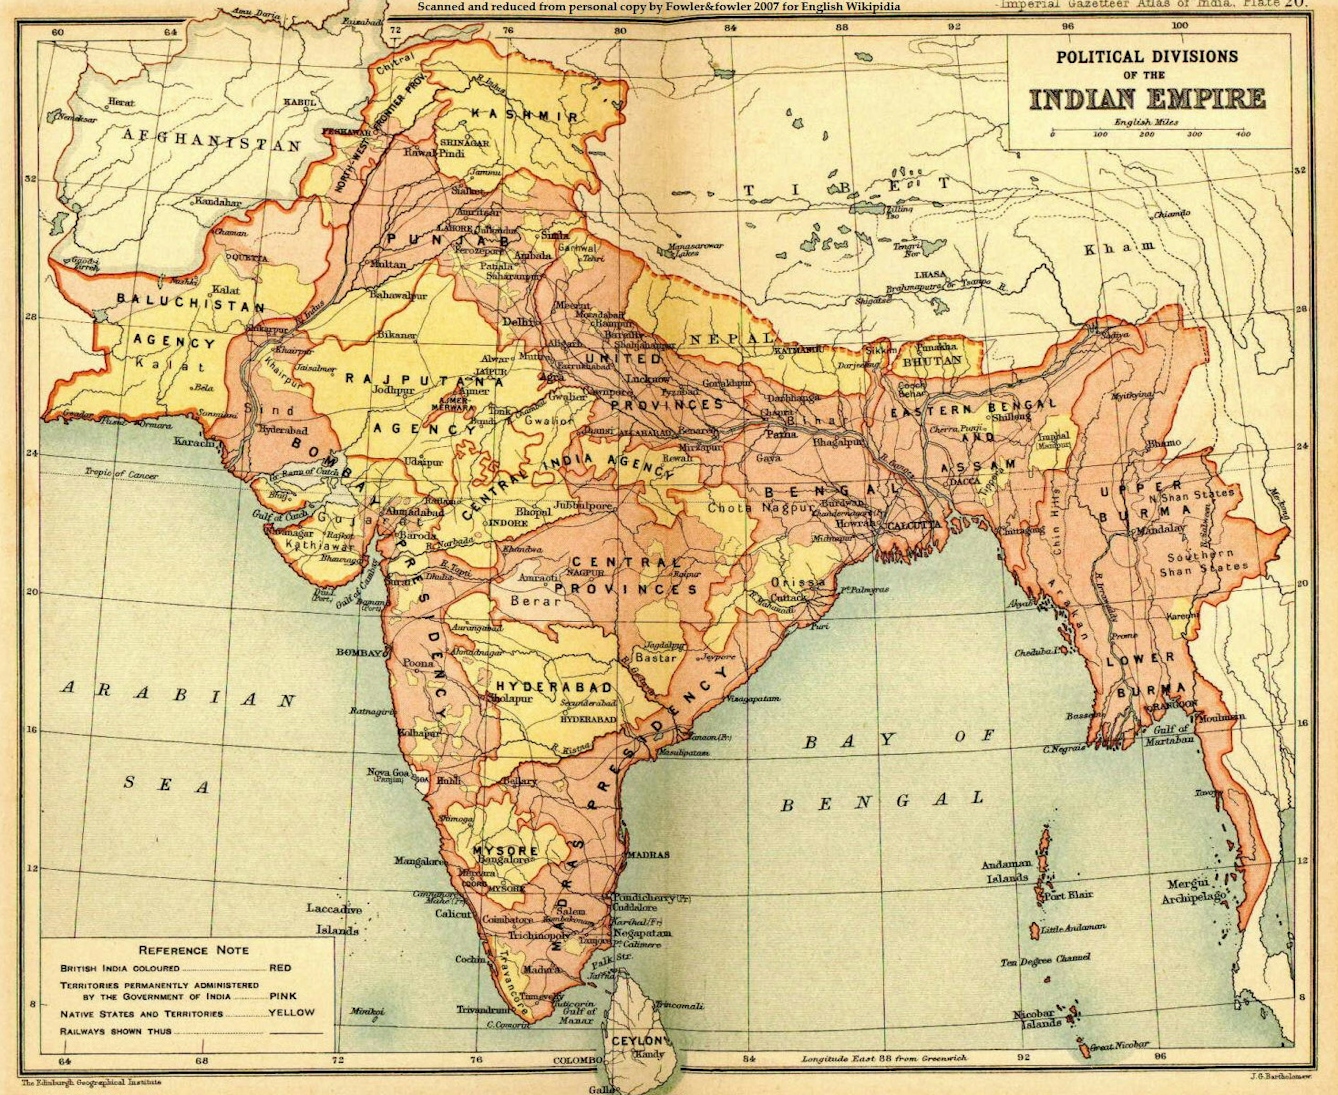 Political divisions of the Indian Empire, 1909